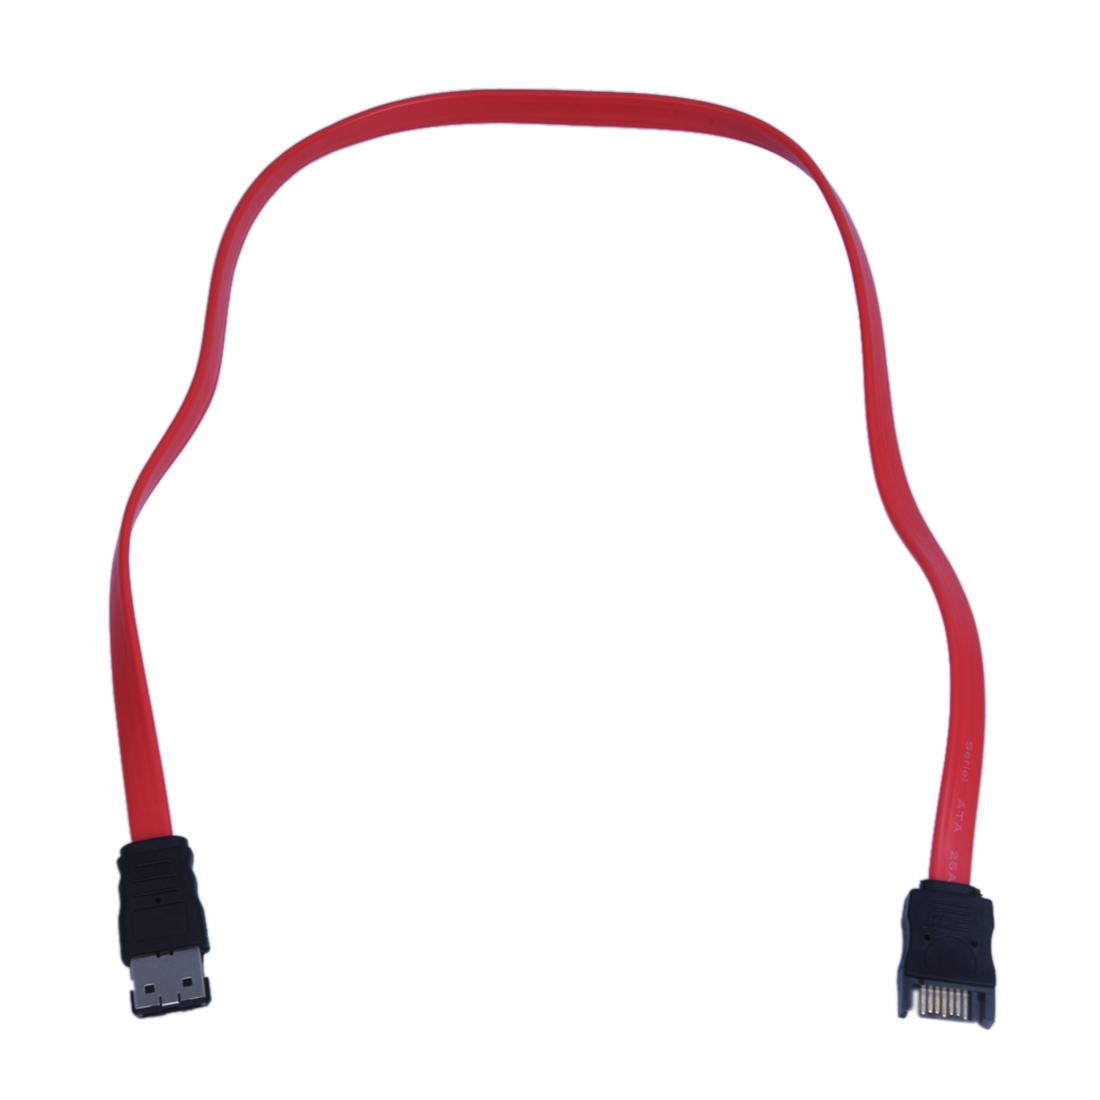 50 cm long 7 pin SATA male to female Extension cable Red
